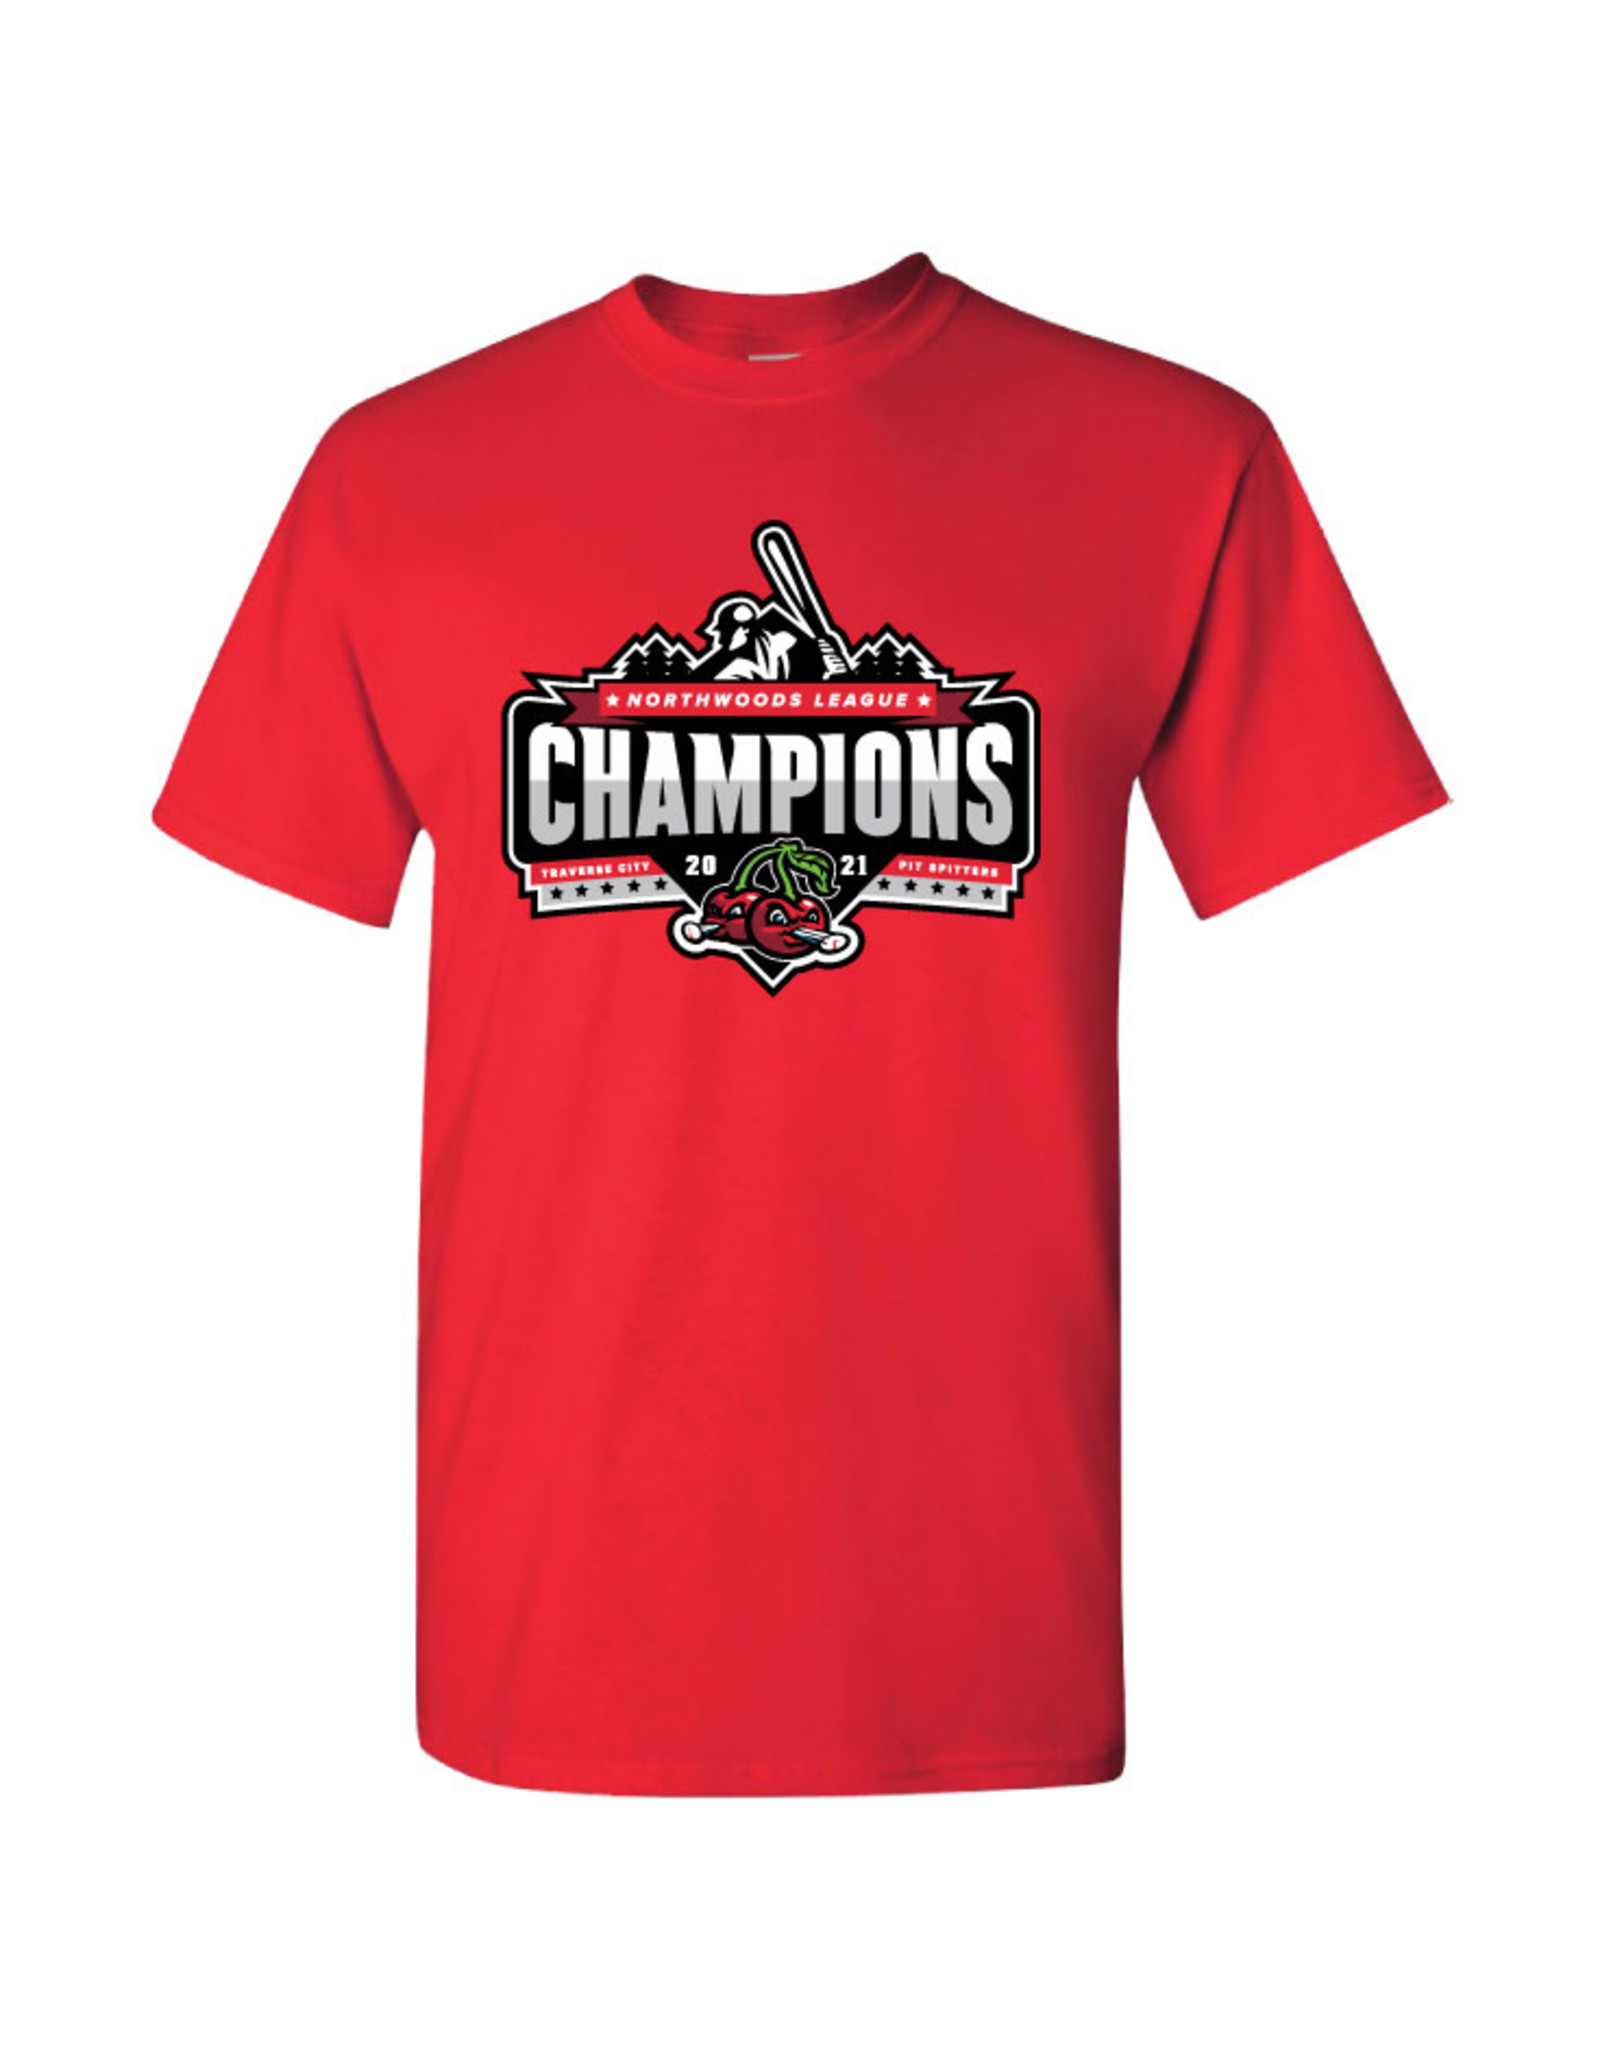 2021 Champions Red Tee